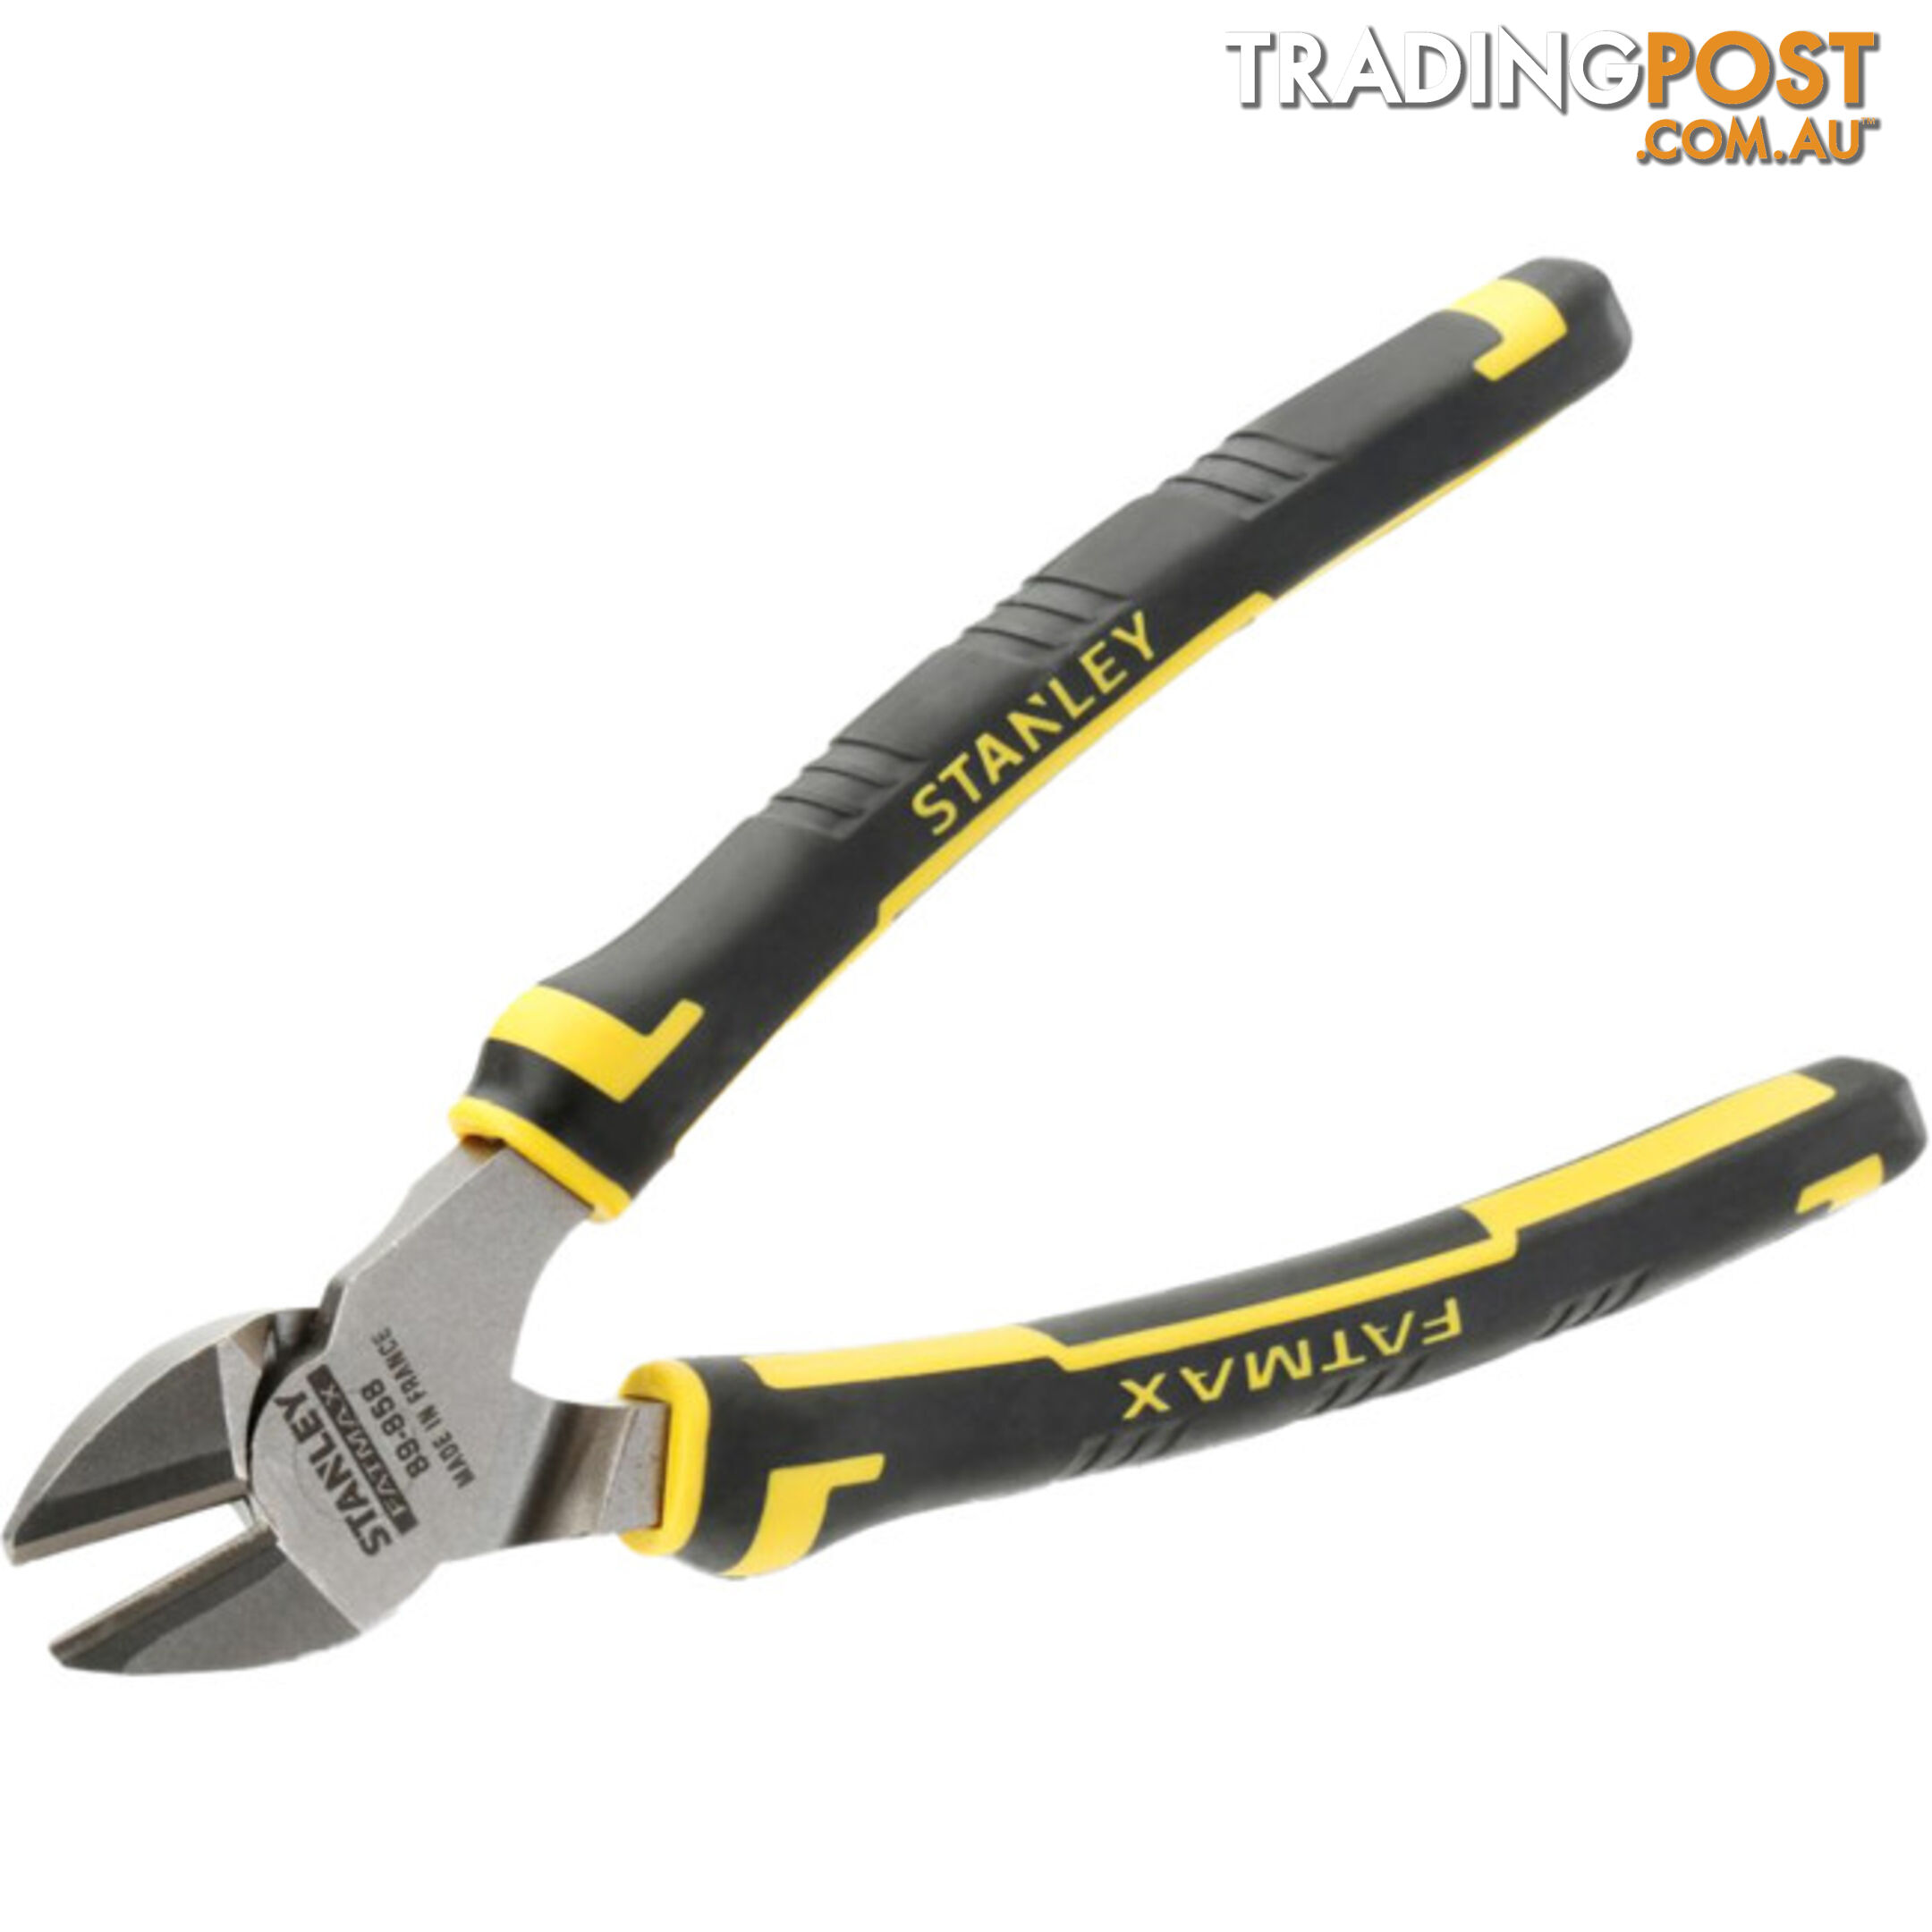 89-858 150MM DIAGONAL CUTTING PLIER MADE IN FRANCE